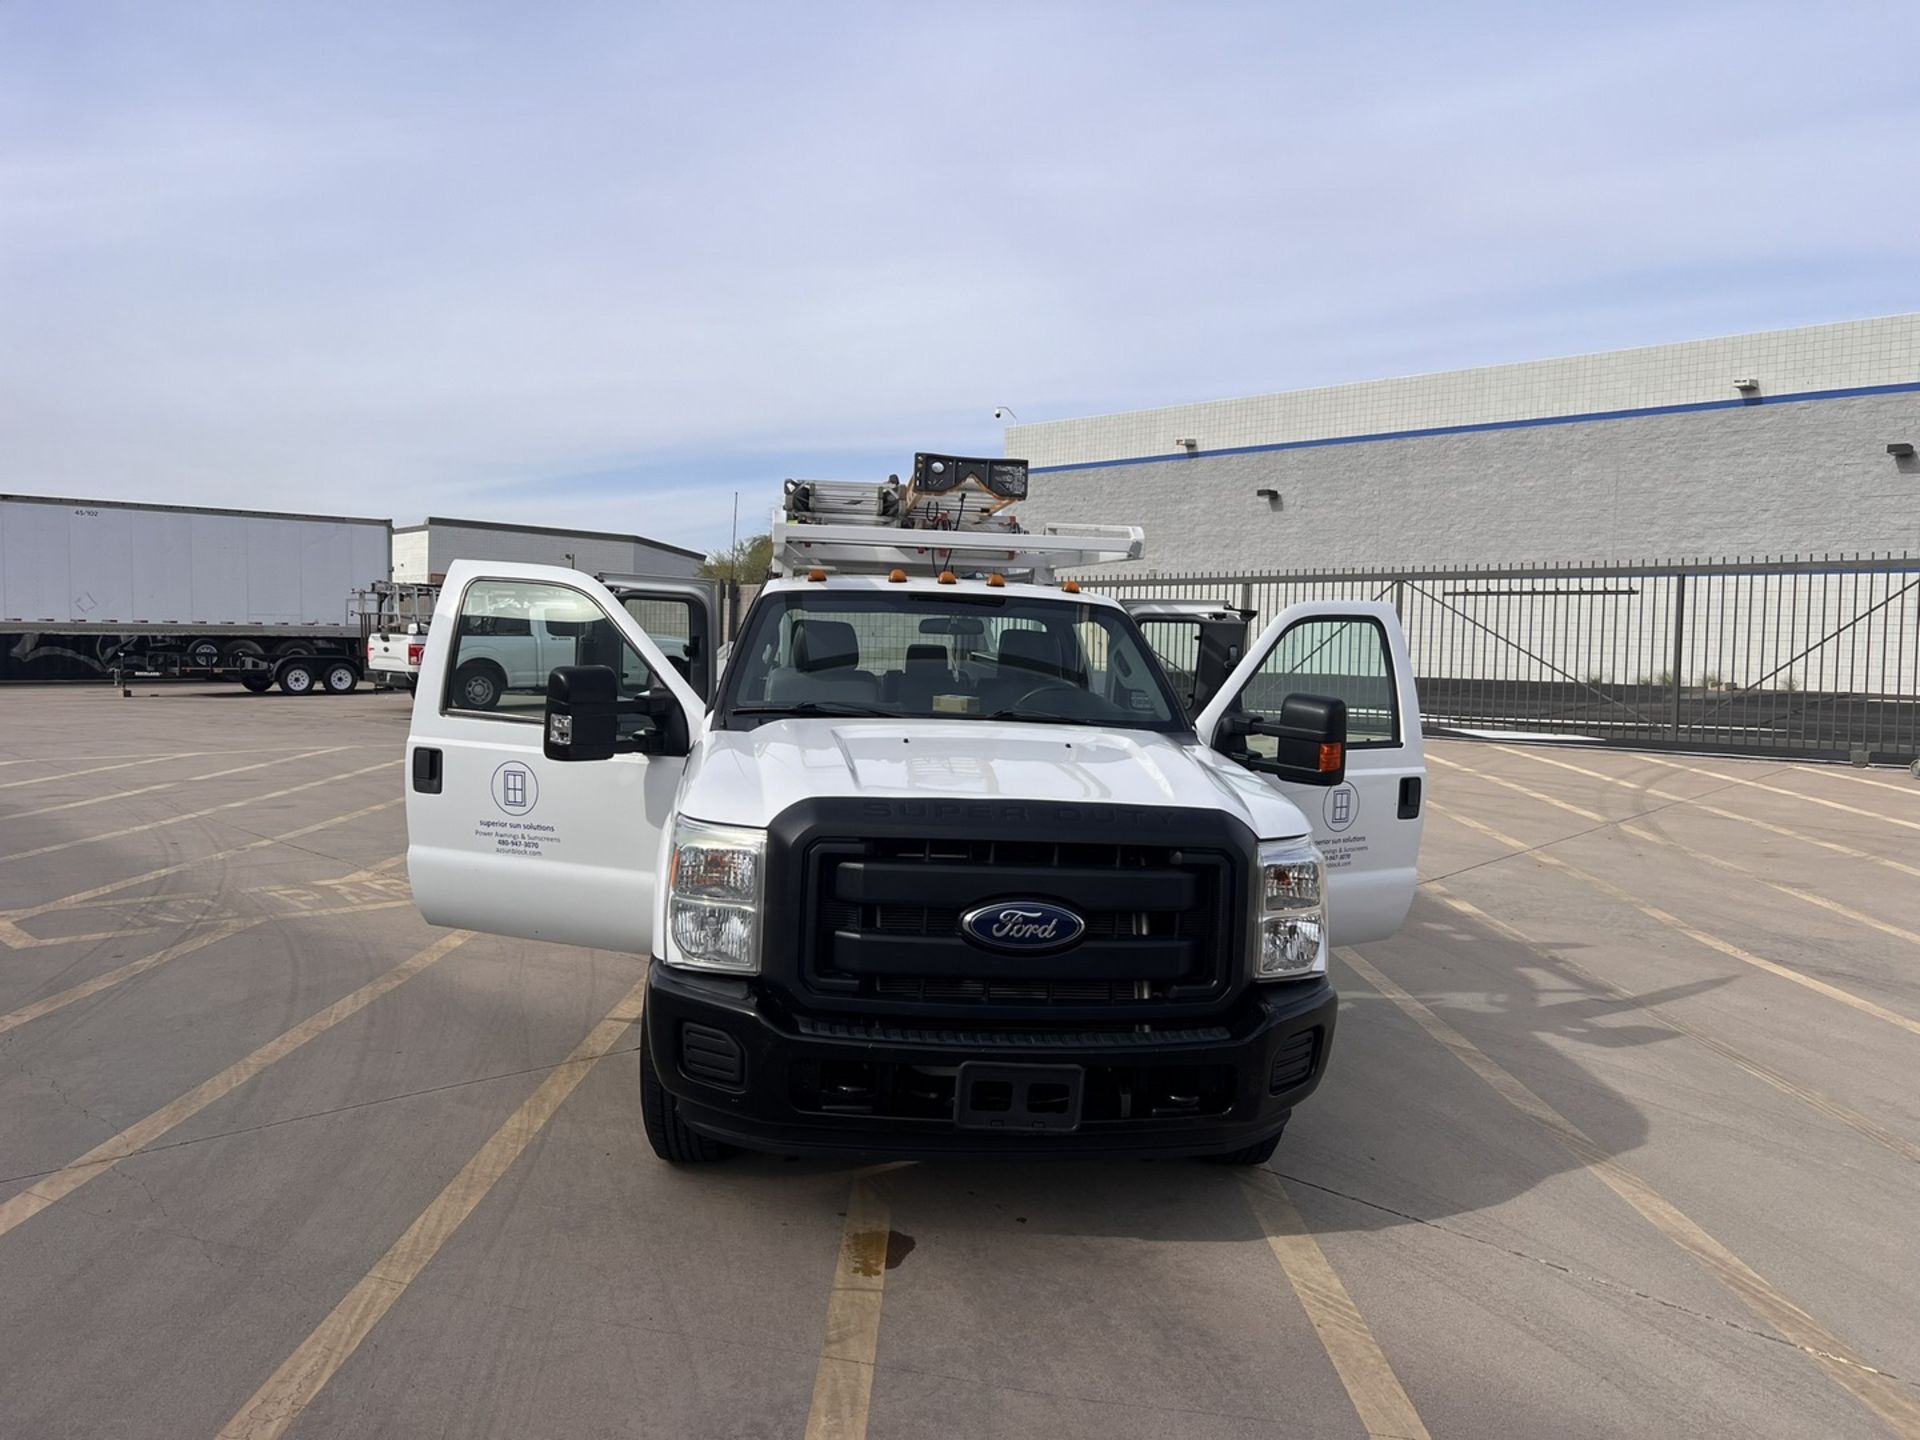 2016 Ford F-350, SuperCab Lariat Truck - Image 2 of 17